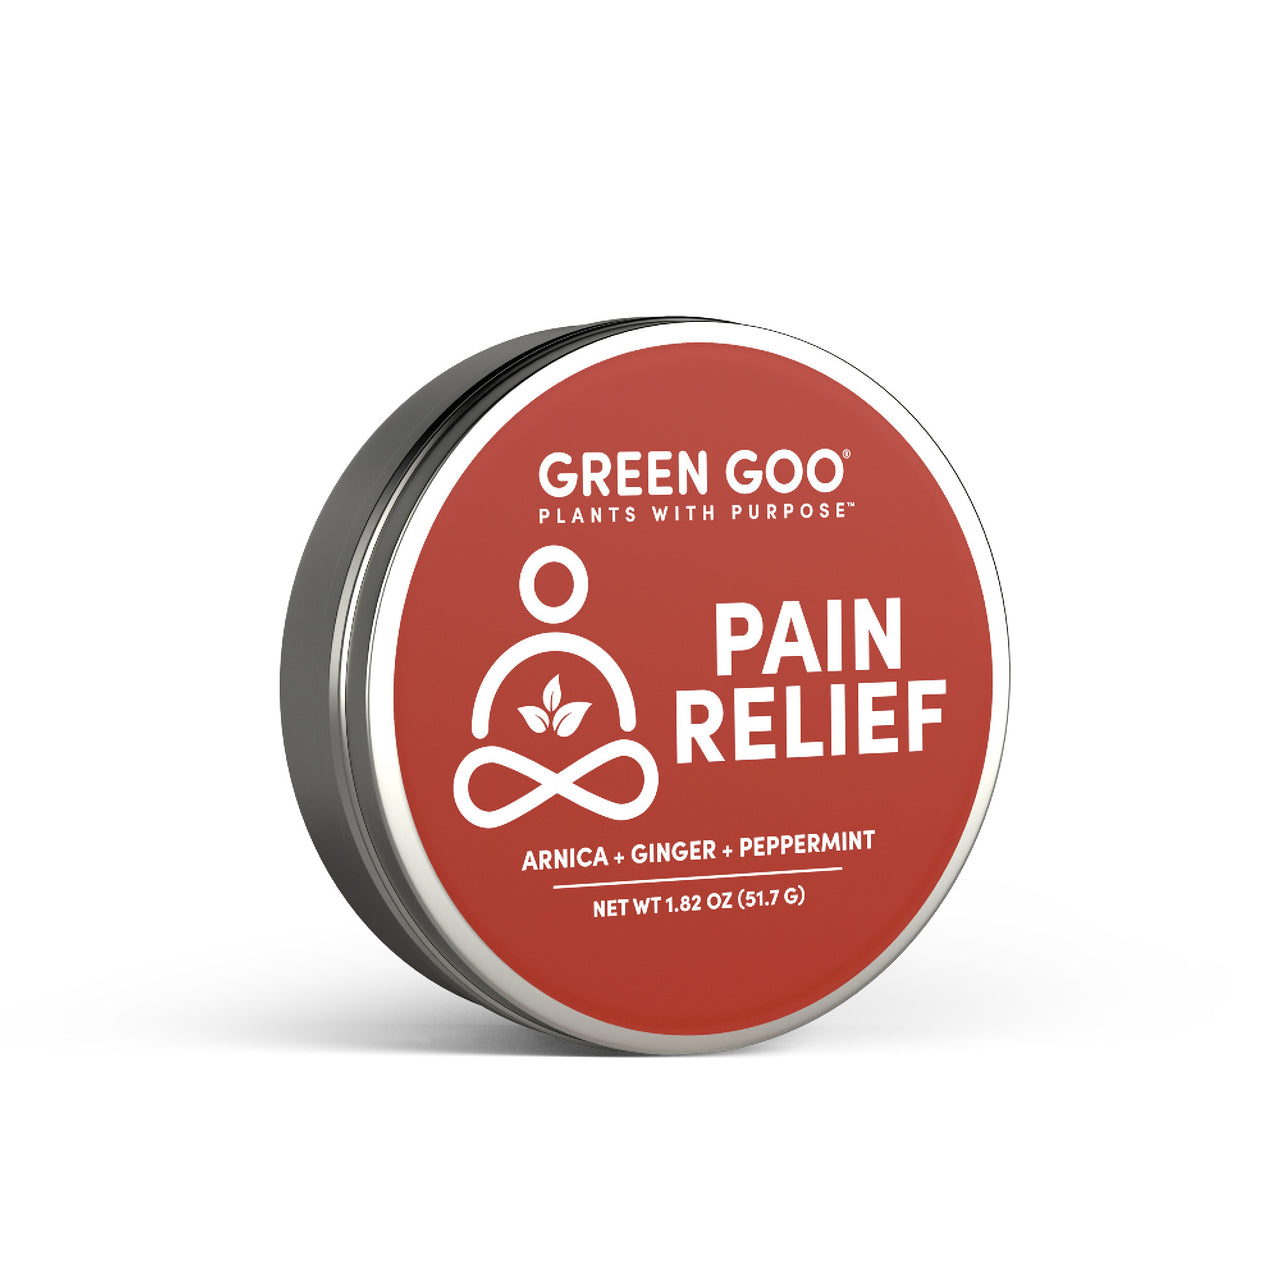 Pain Relief